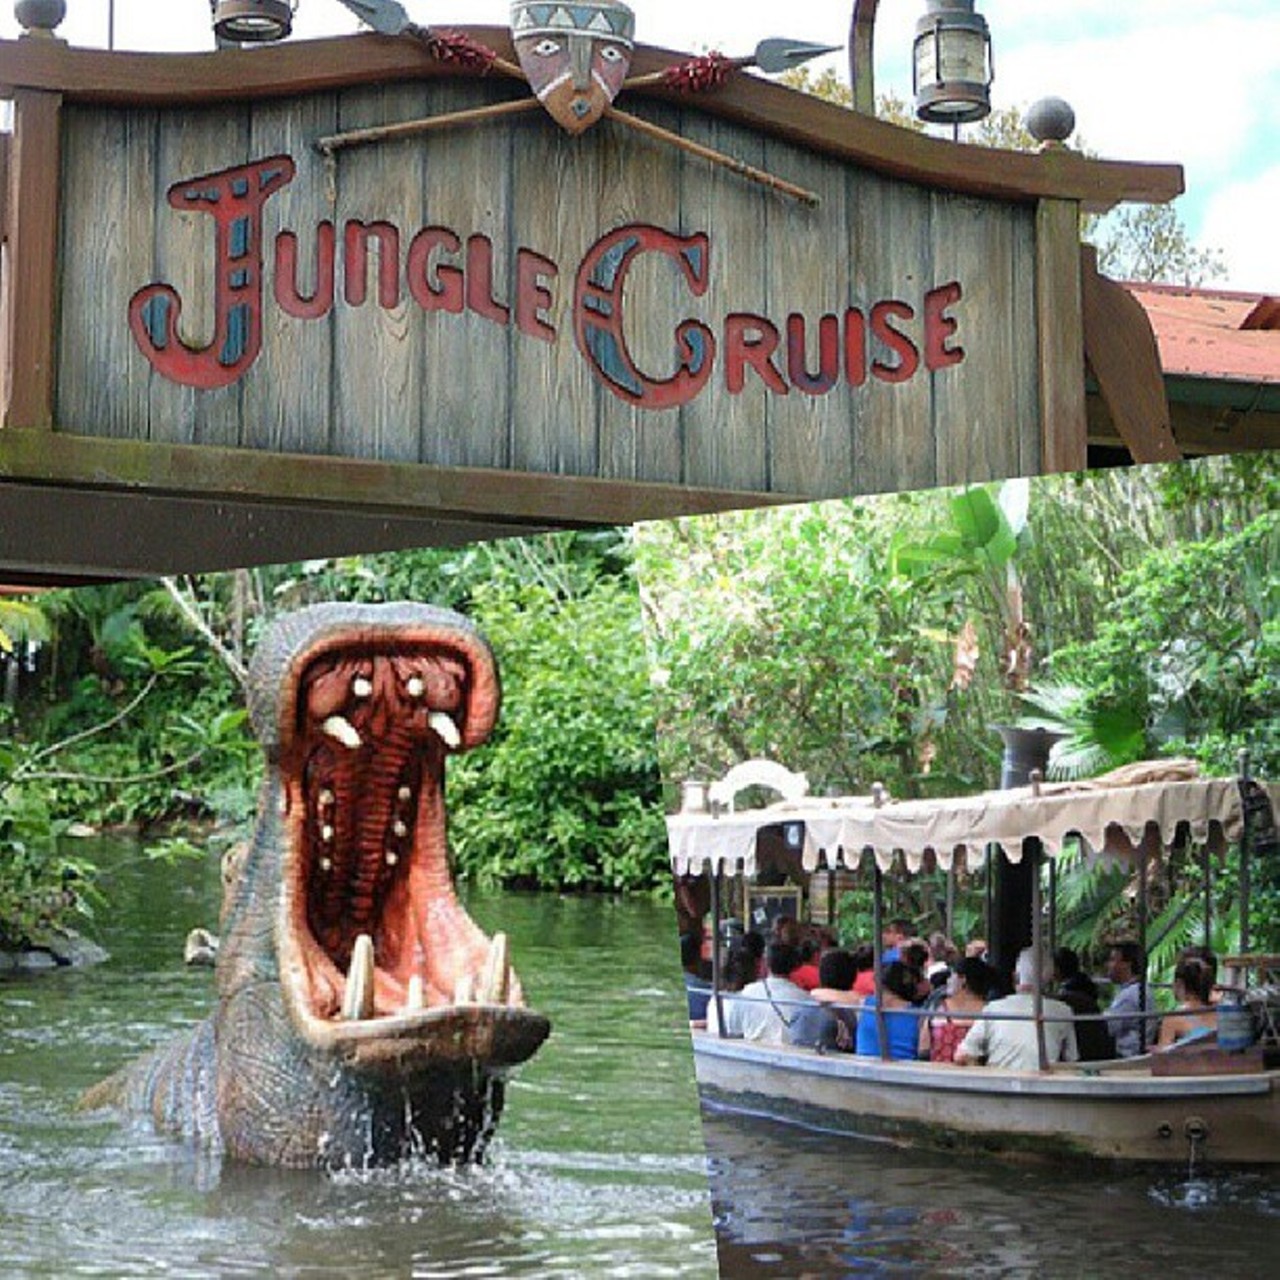 The water in the lagoon of the Jungle Cruise is tinted green to hide the tracks. But don't worry &#150;&nbsp;Disney says the coloring it uses is biodegradable and environmentally friendly.